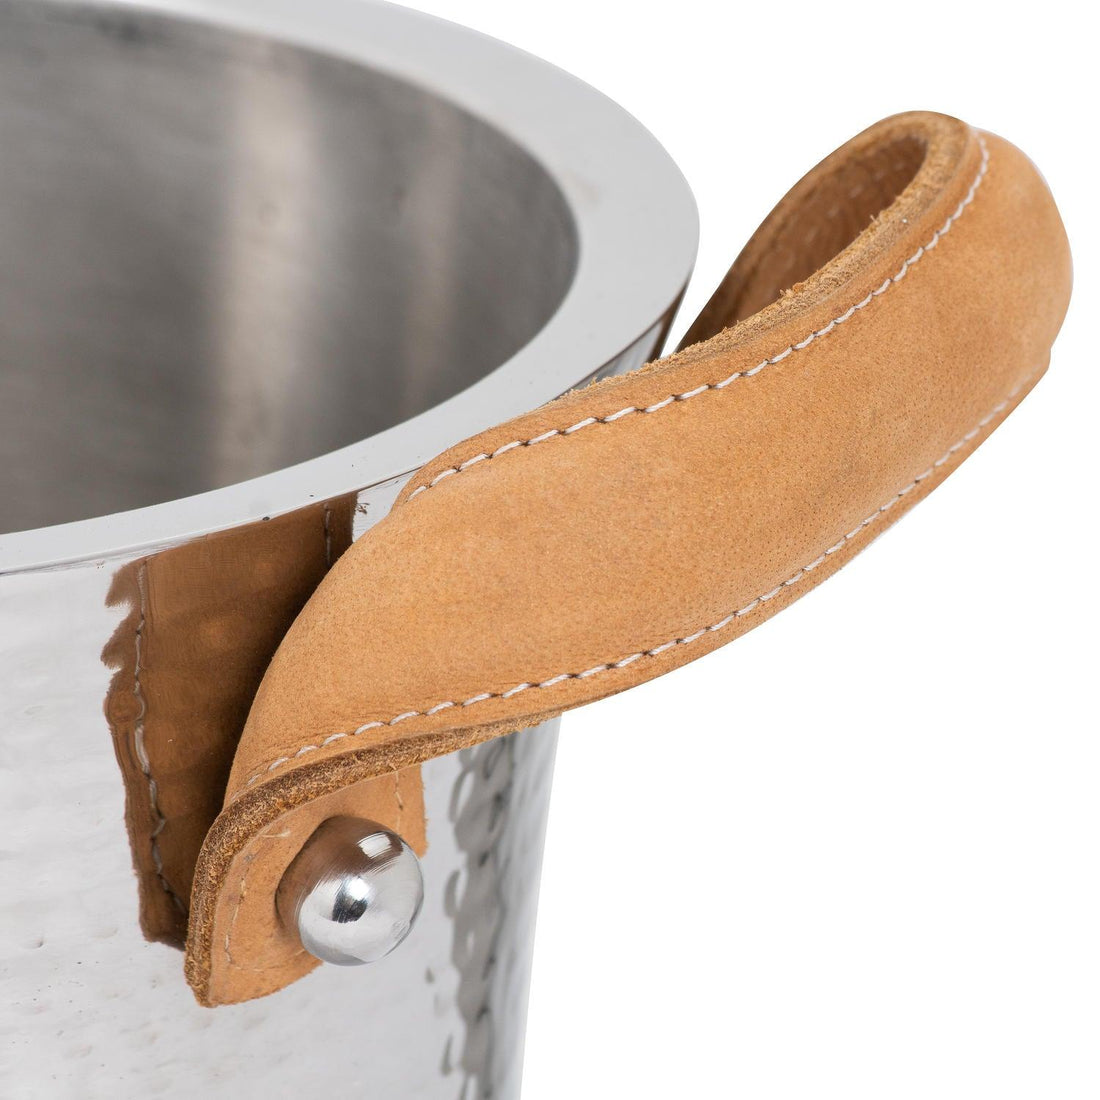 Leather Handled Ice Bucket - £104.95 - Gifts & Accessories > Kitchen And Tableware > Ornaments 